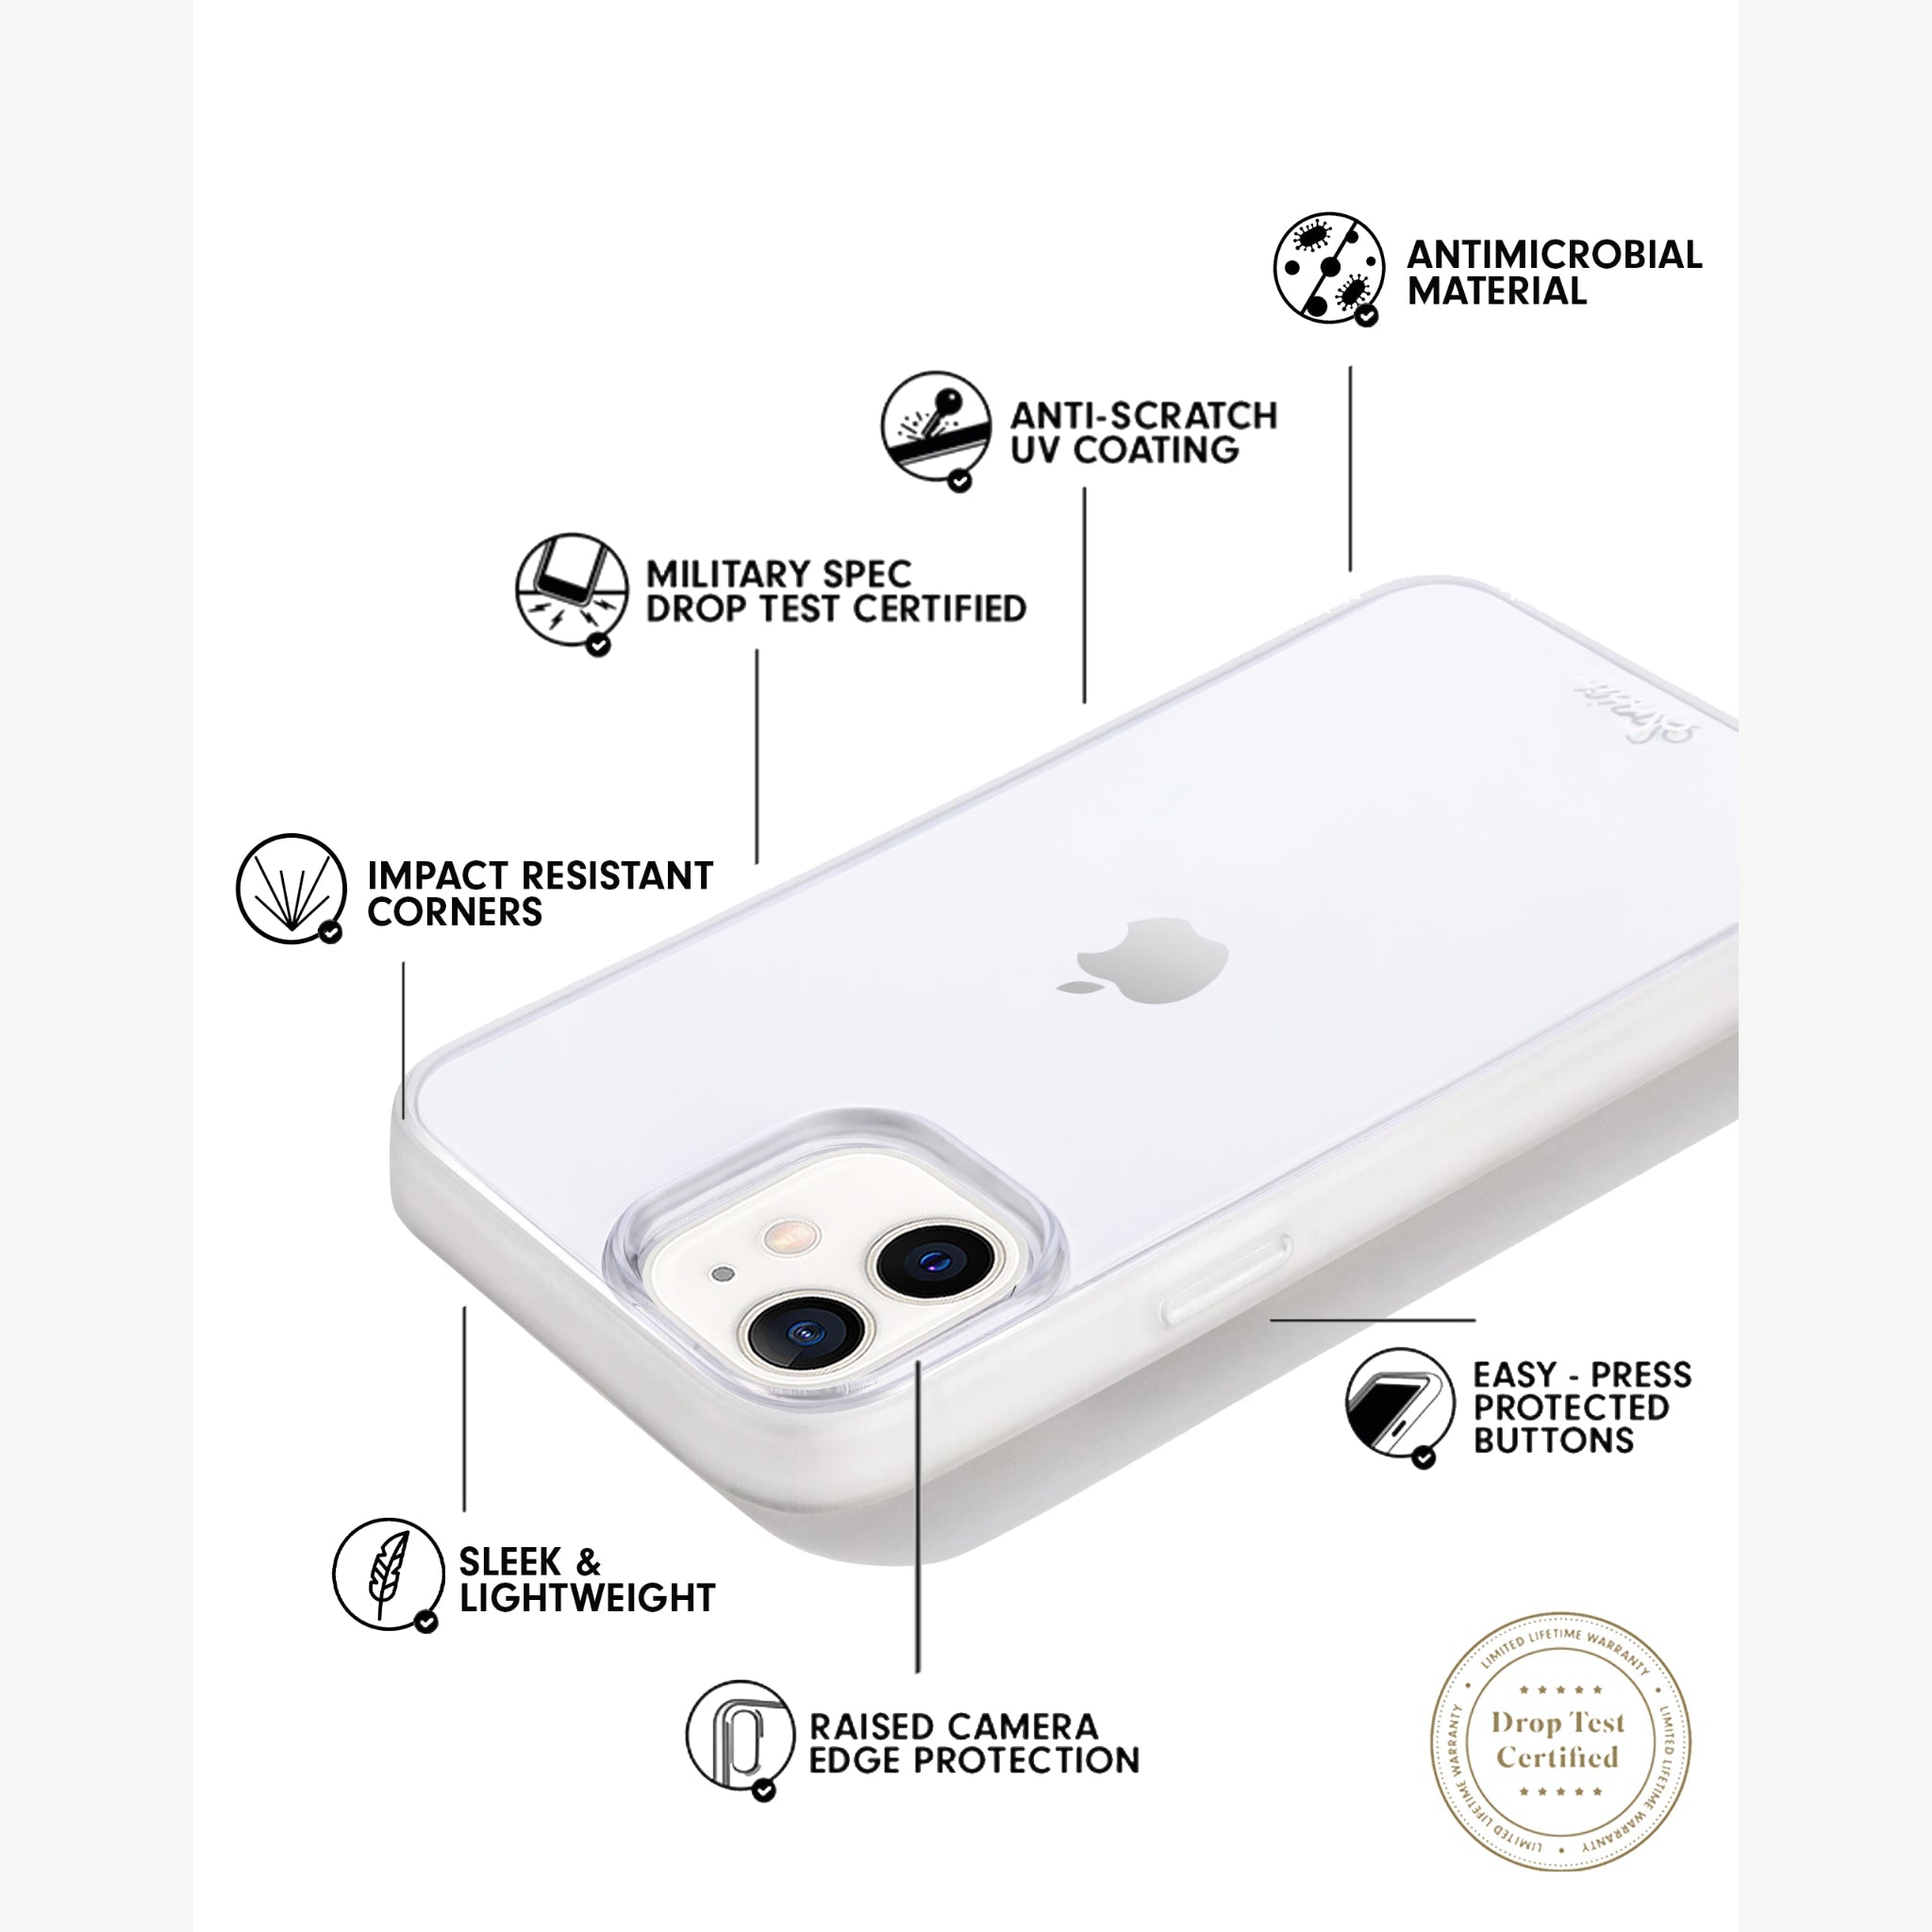 protective qualities of the phone case shown aroundd a white iphone 